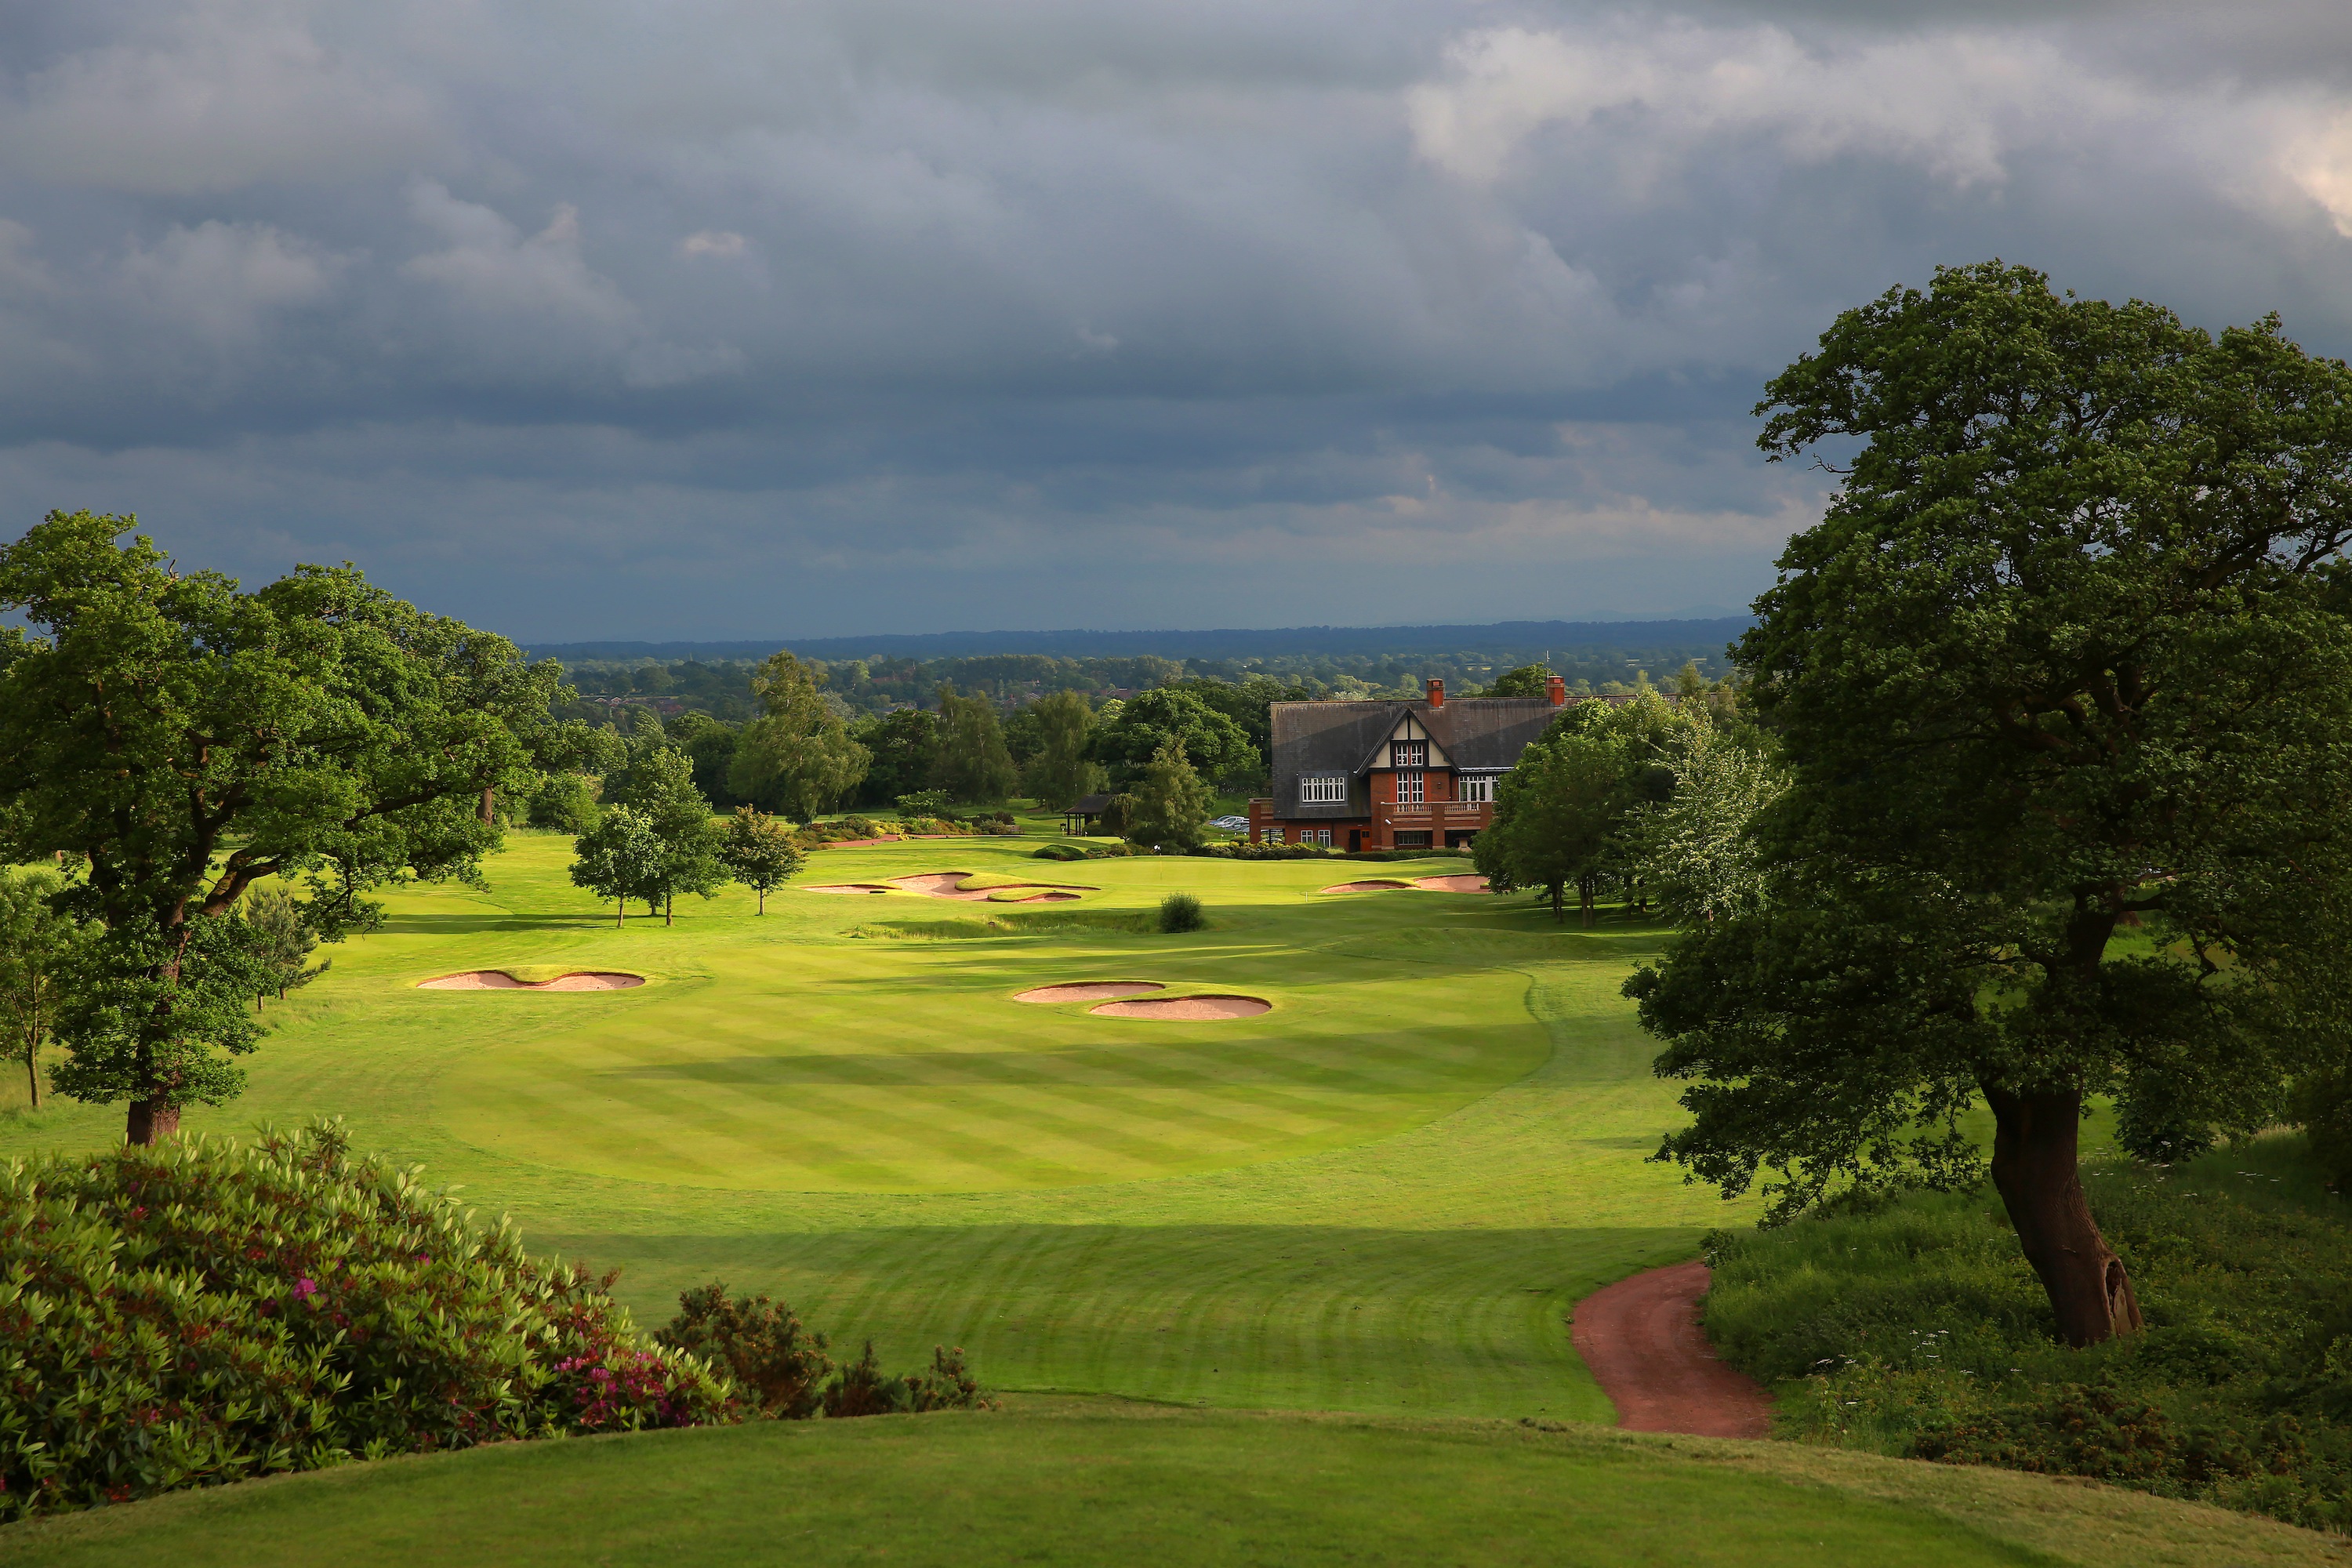 The cheshire course at Carden Park